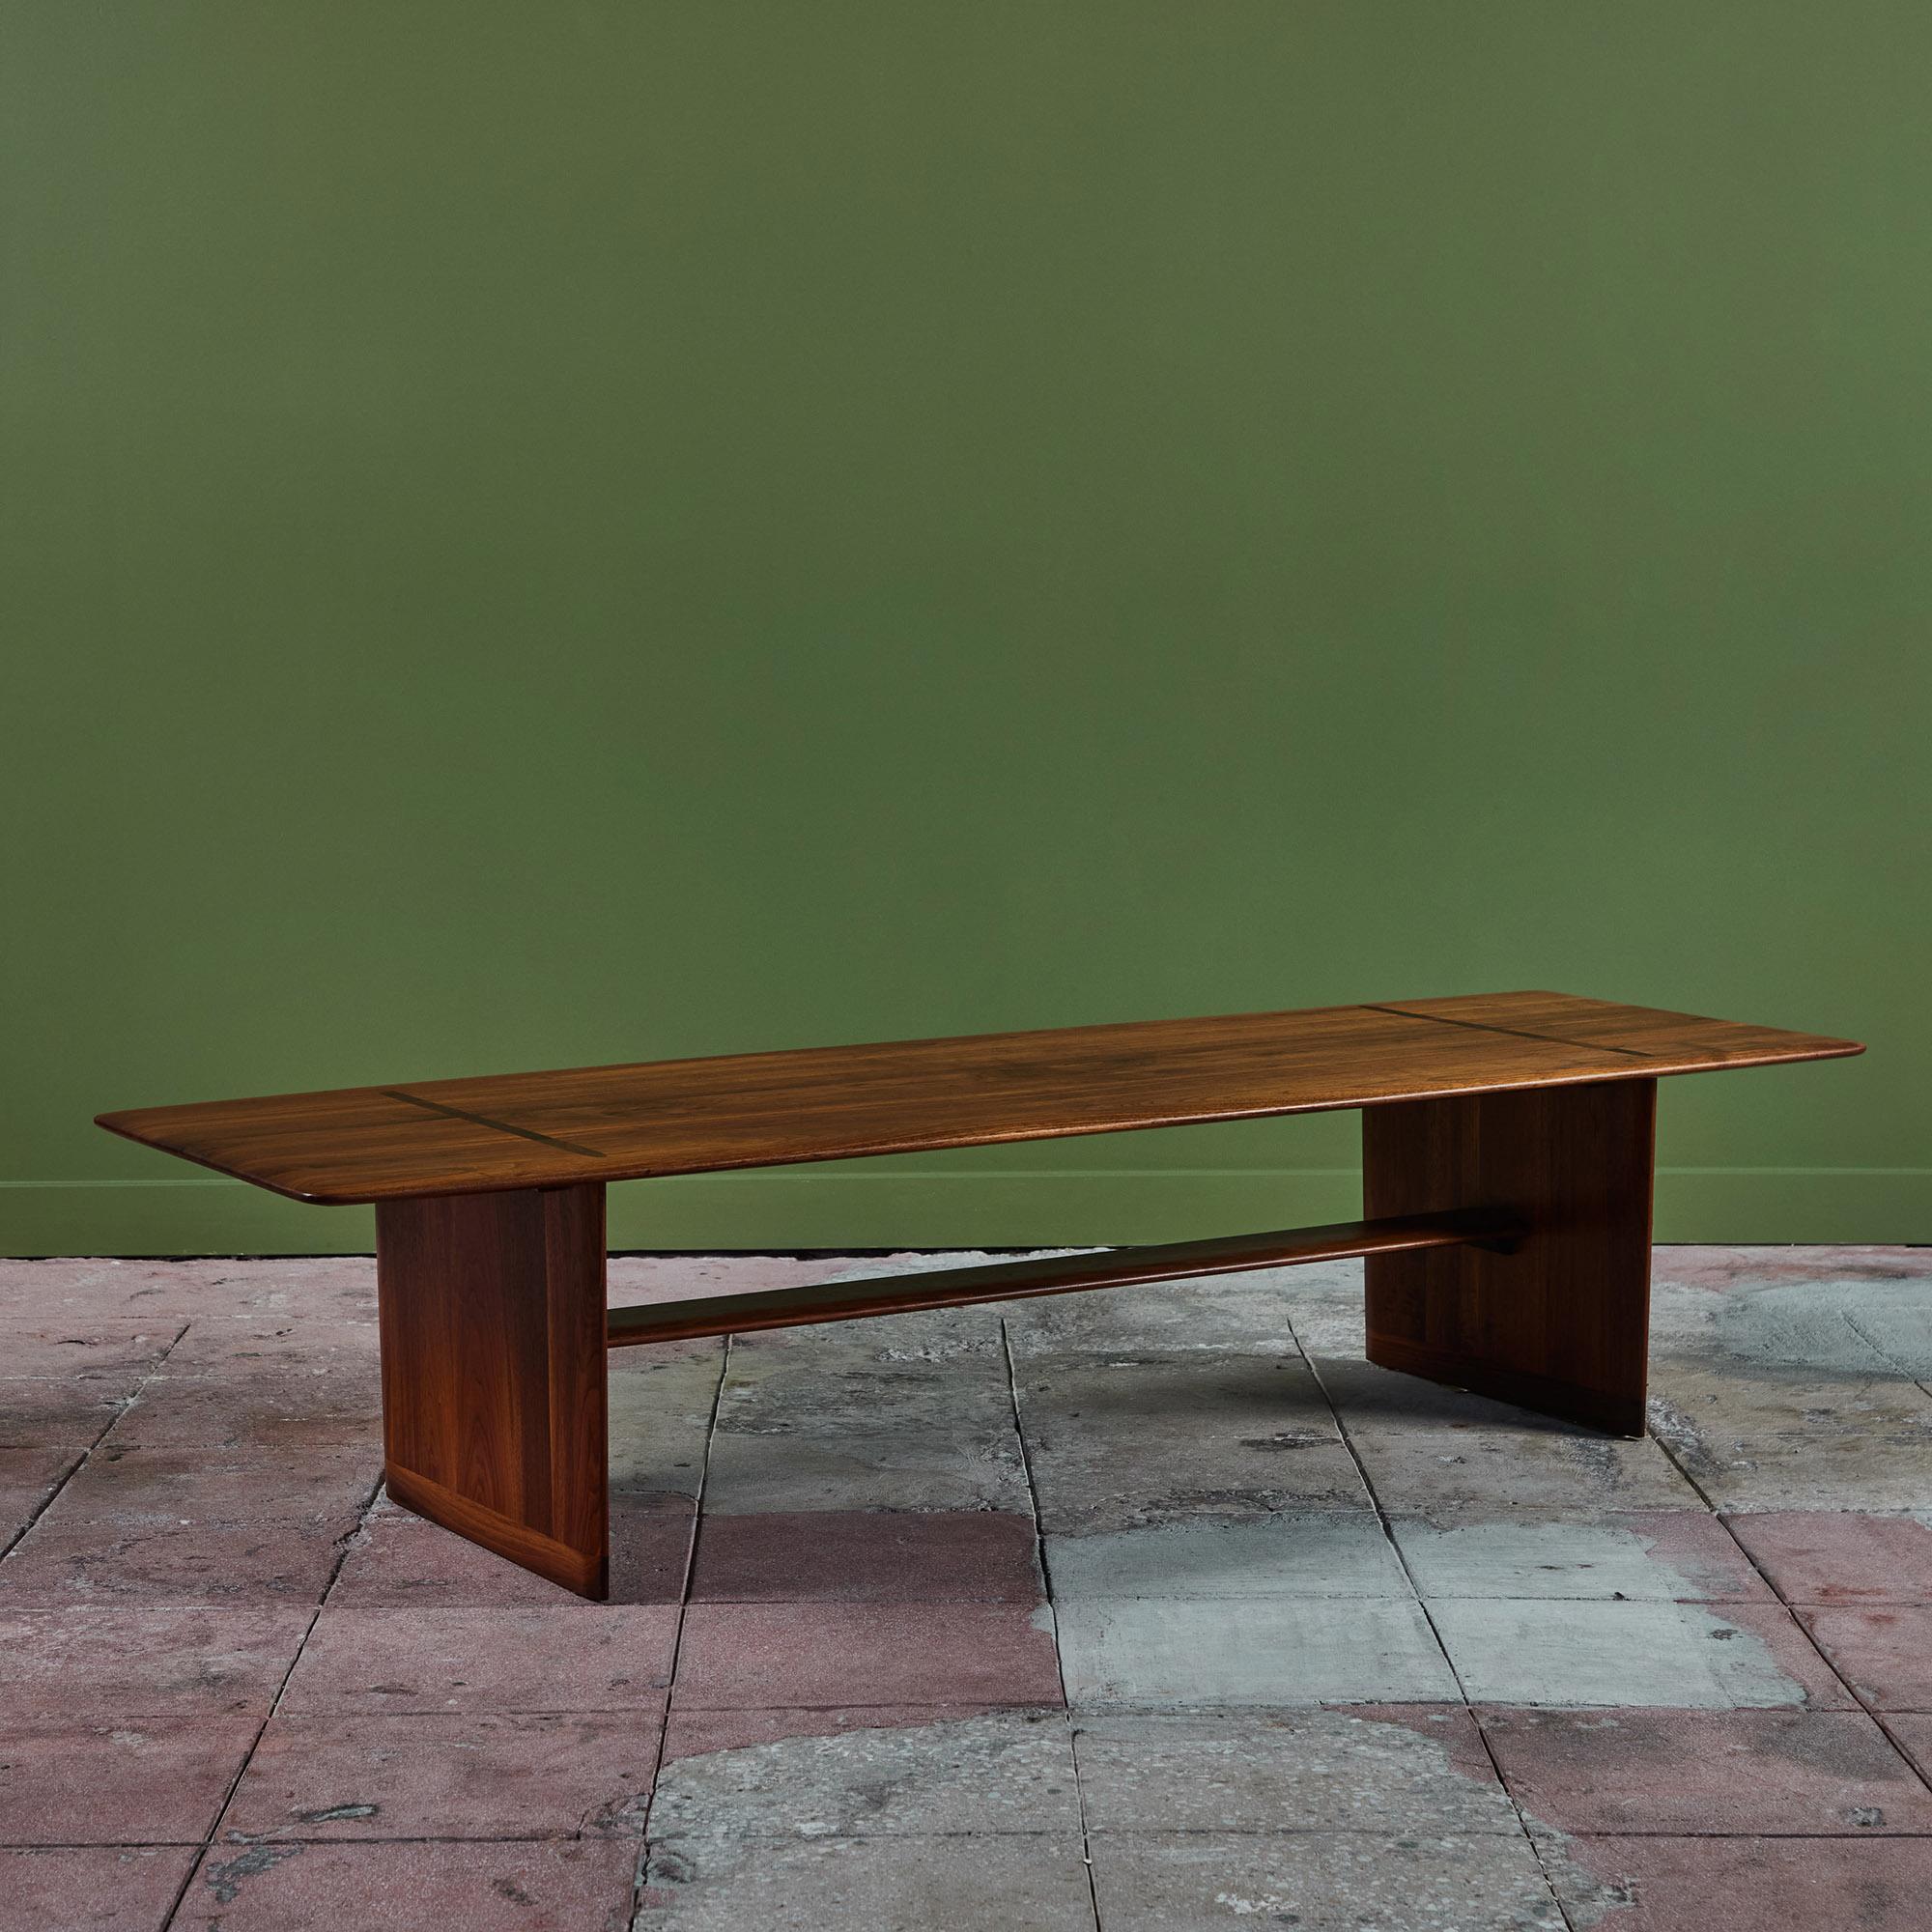 Brown Saltman rectangular coffee table, c.1950s, USA. The table features a knife edge walnut table top with beautiful exposed joinery work where the legs meet the top. The legs are connected by one long stretcher.

Dimensions
65.5” width x 21.25